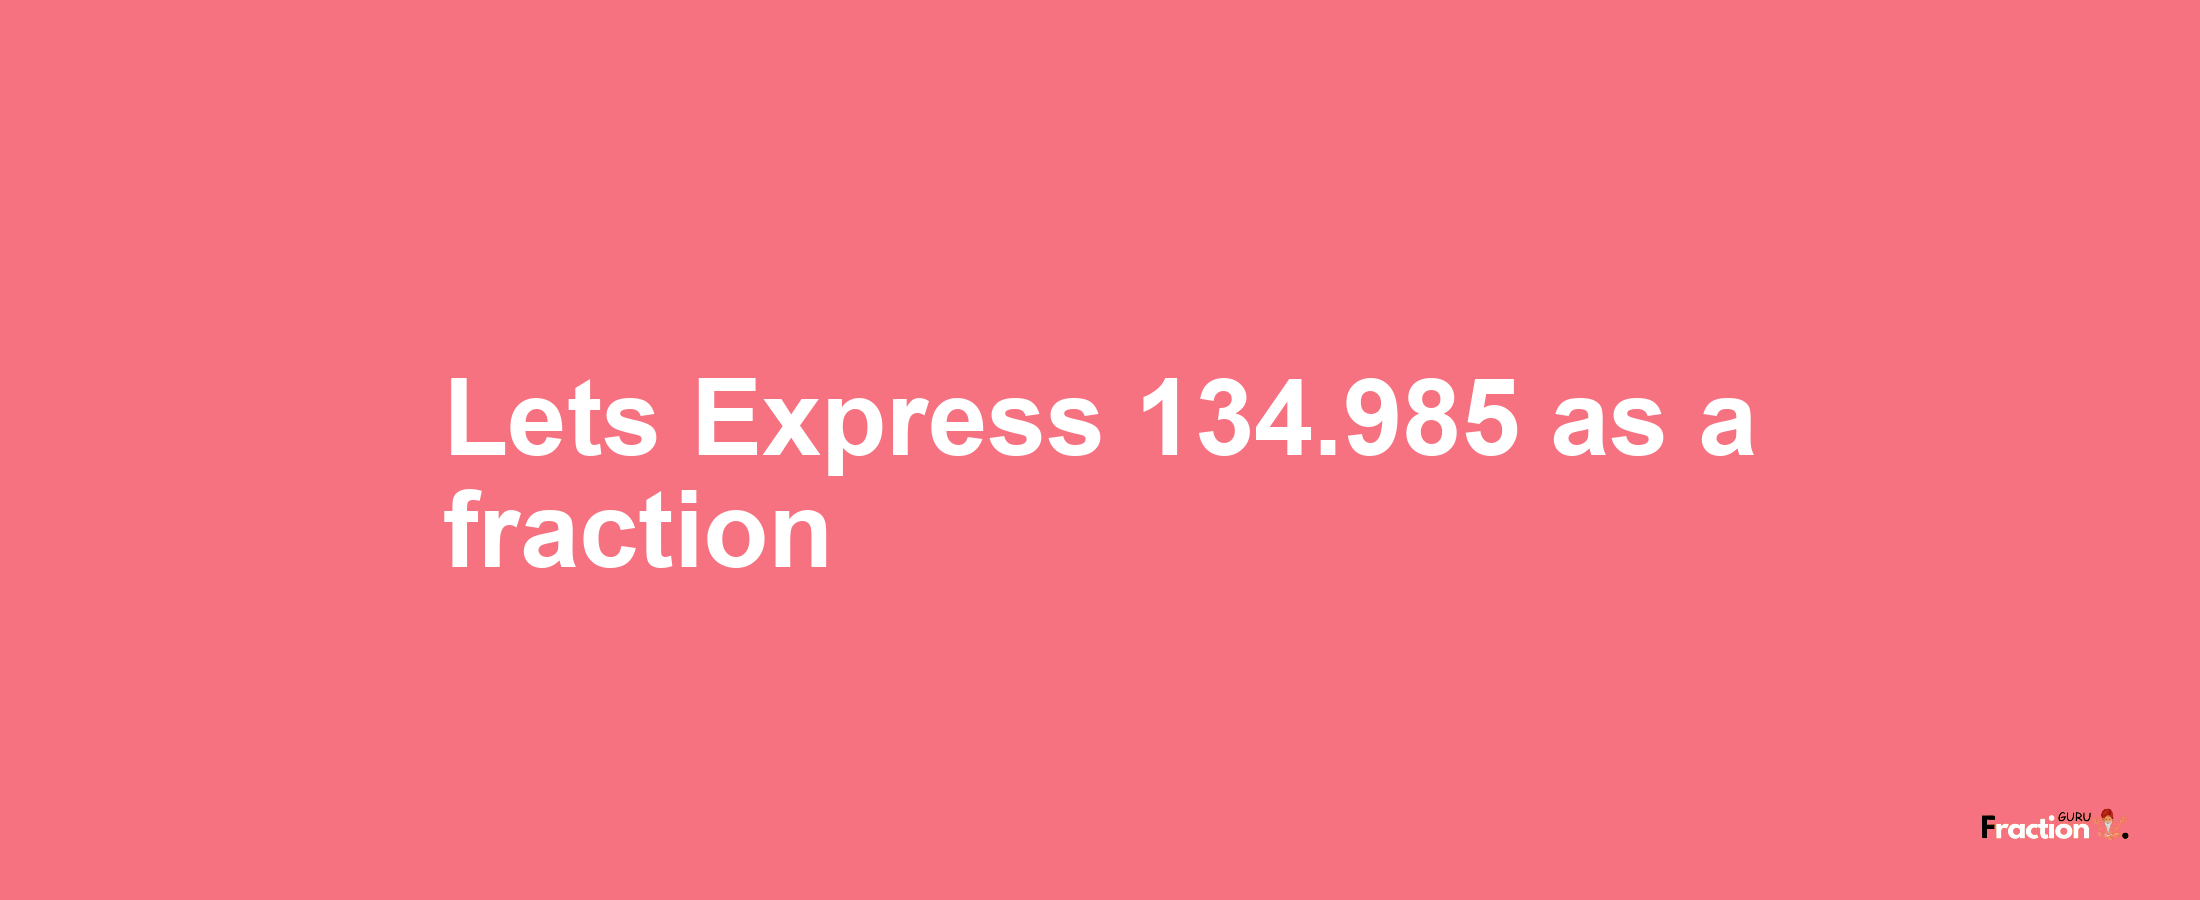 Lets Express 134.985 as afraction